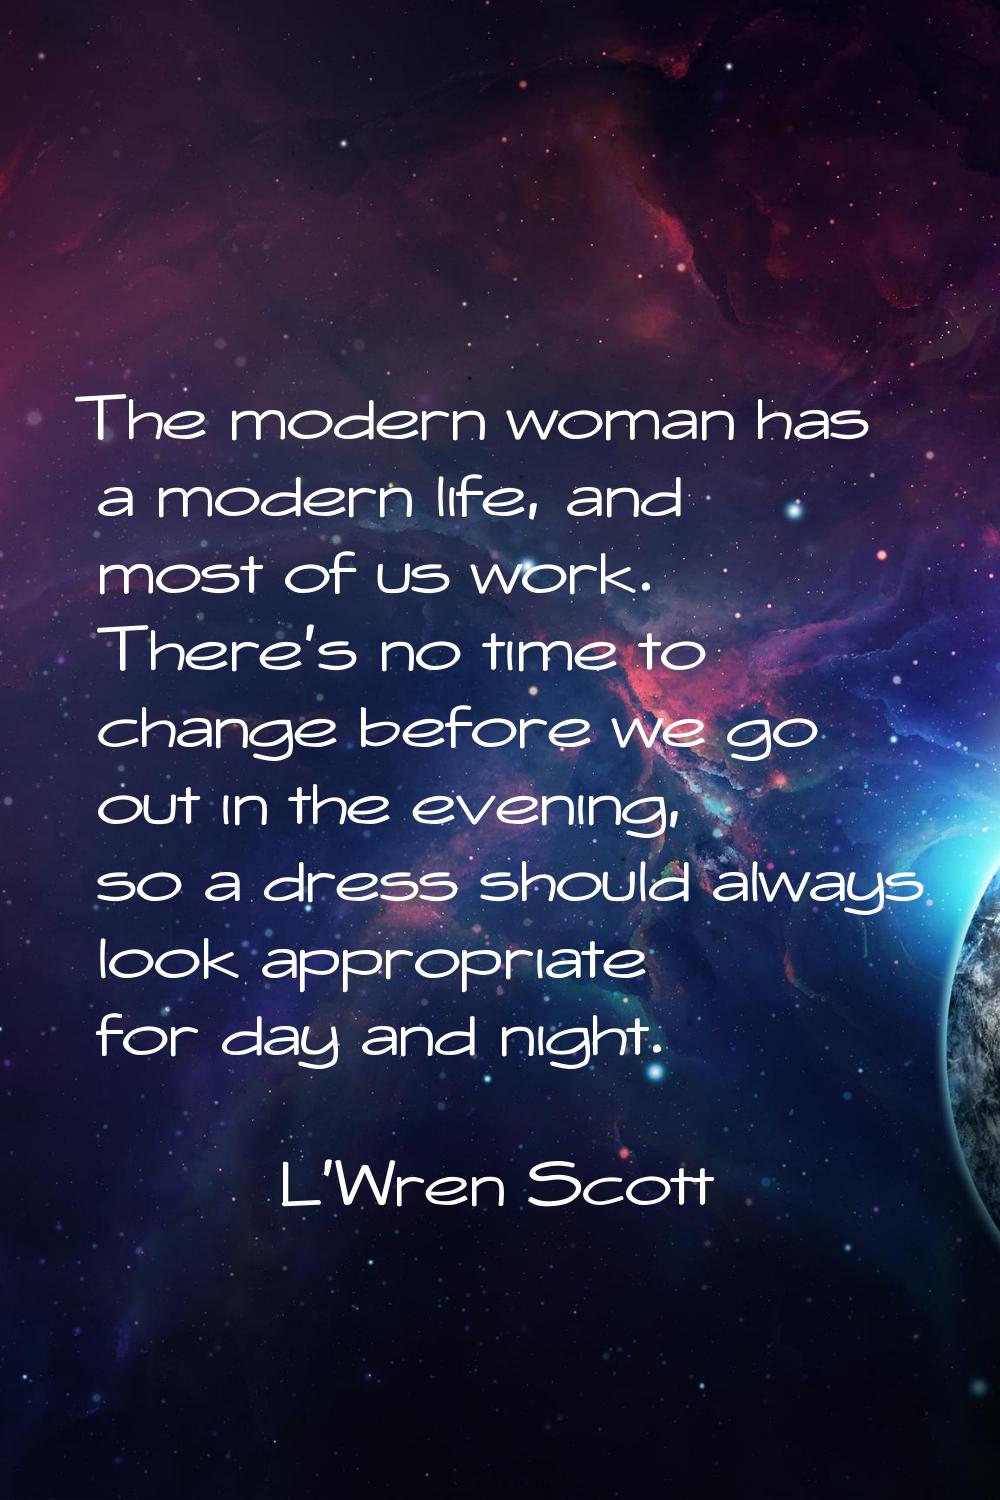 The modern woman has a modern life, and most of us work. There's no time to change before we go out